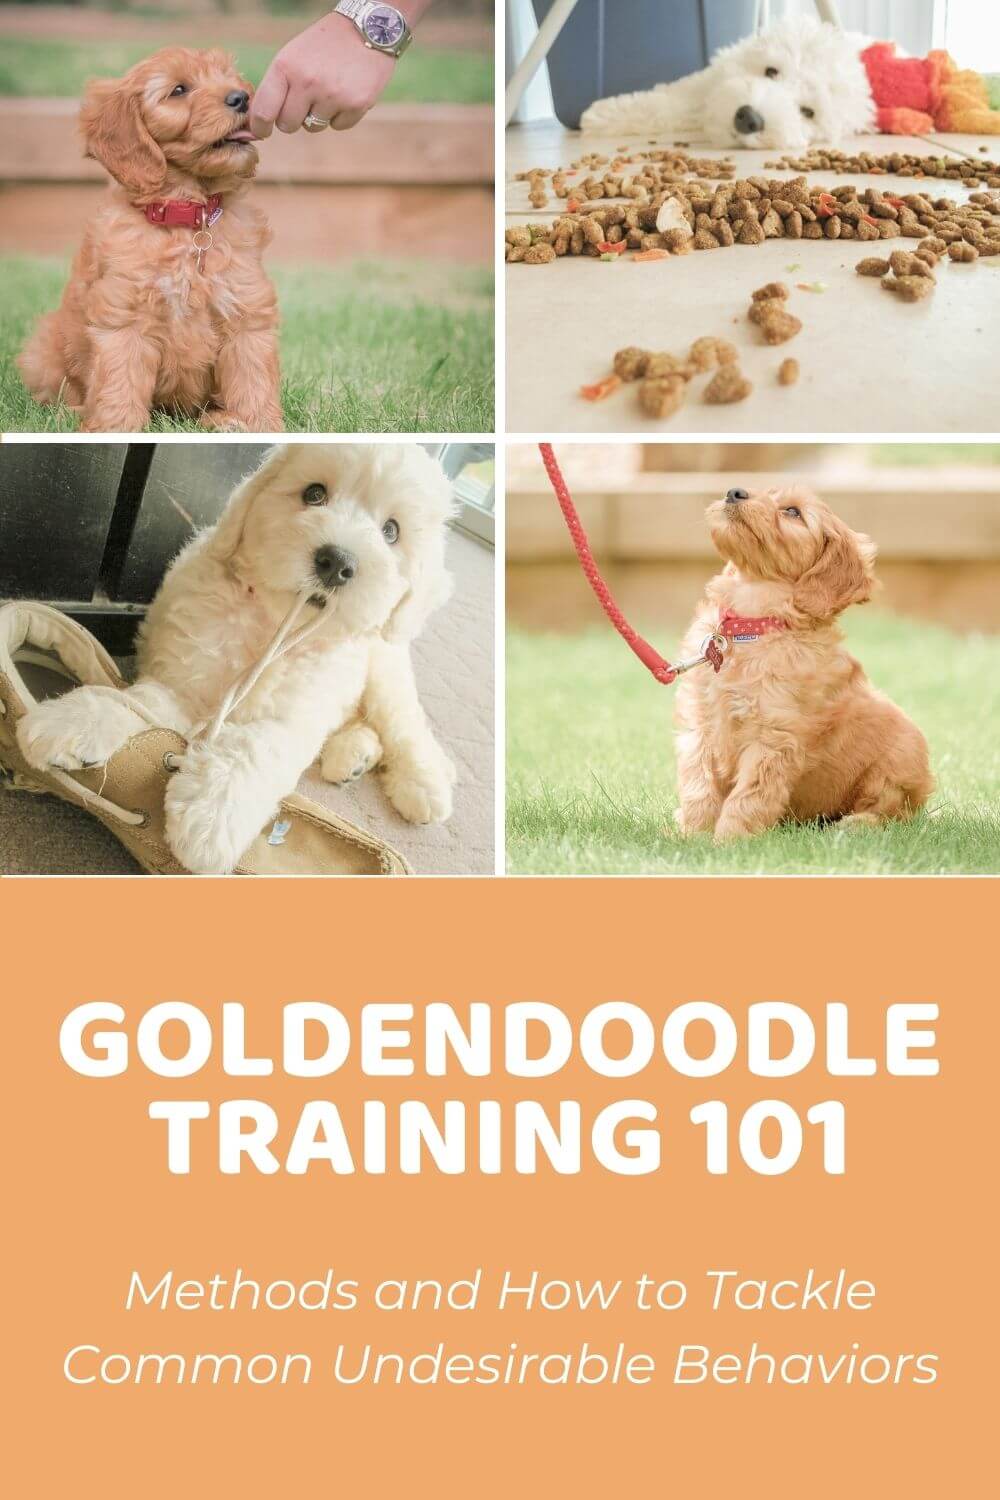 how hard are golden doodles to train